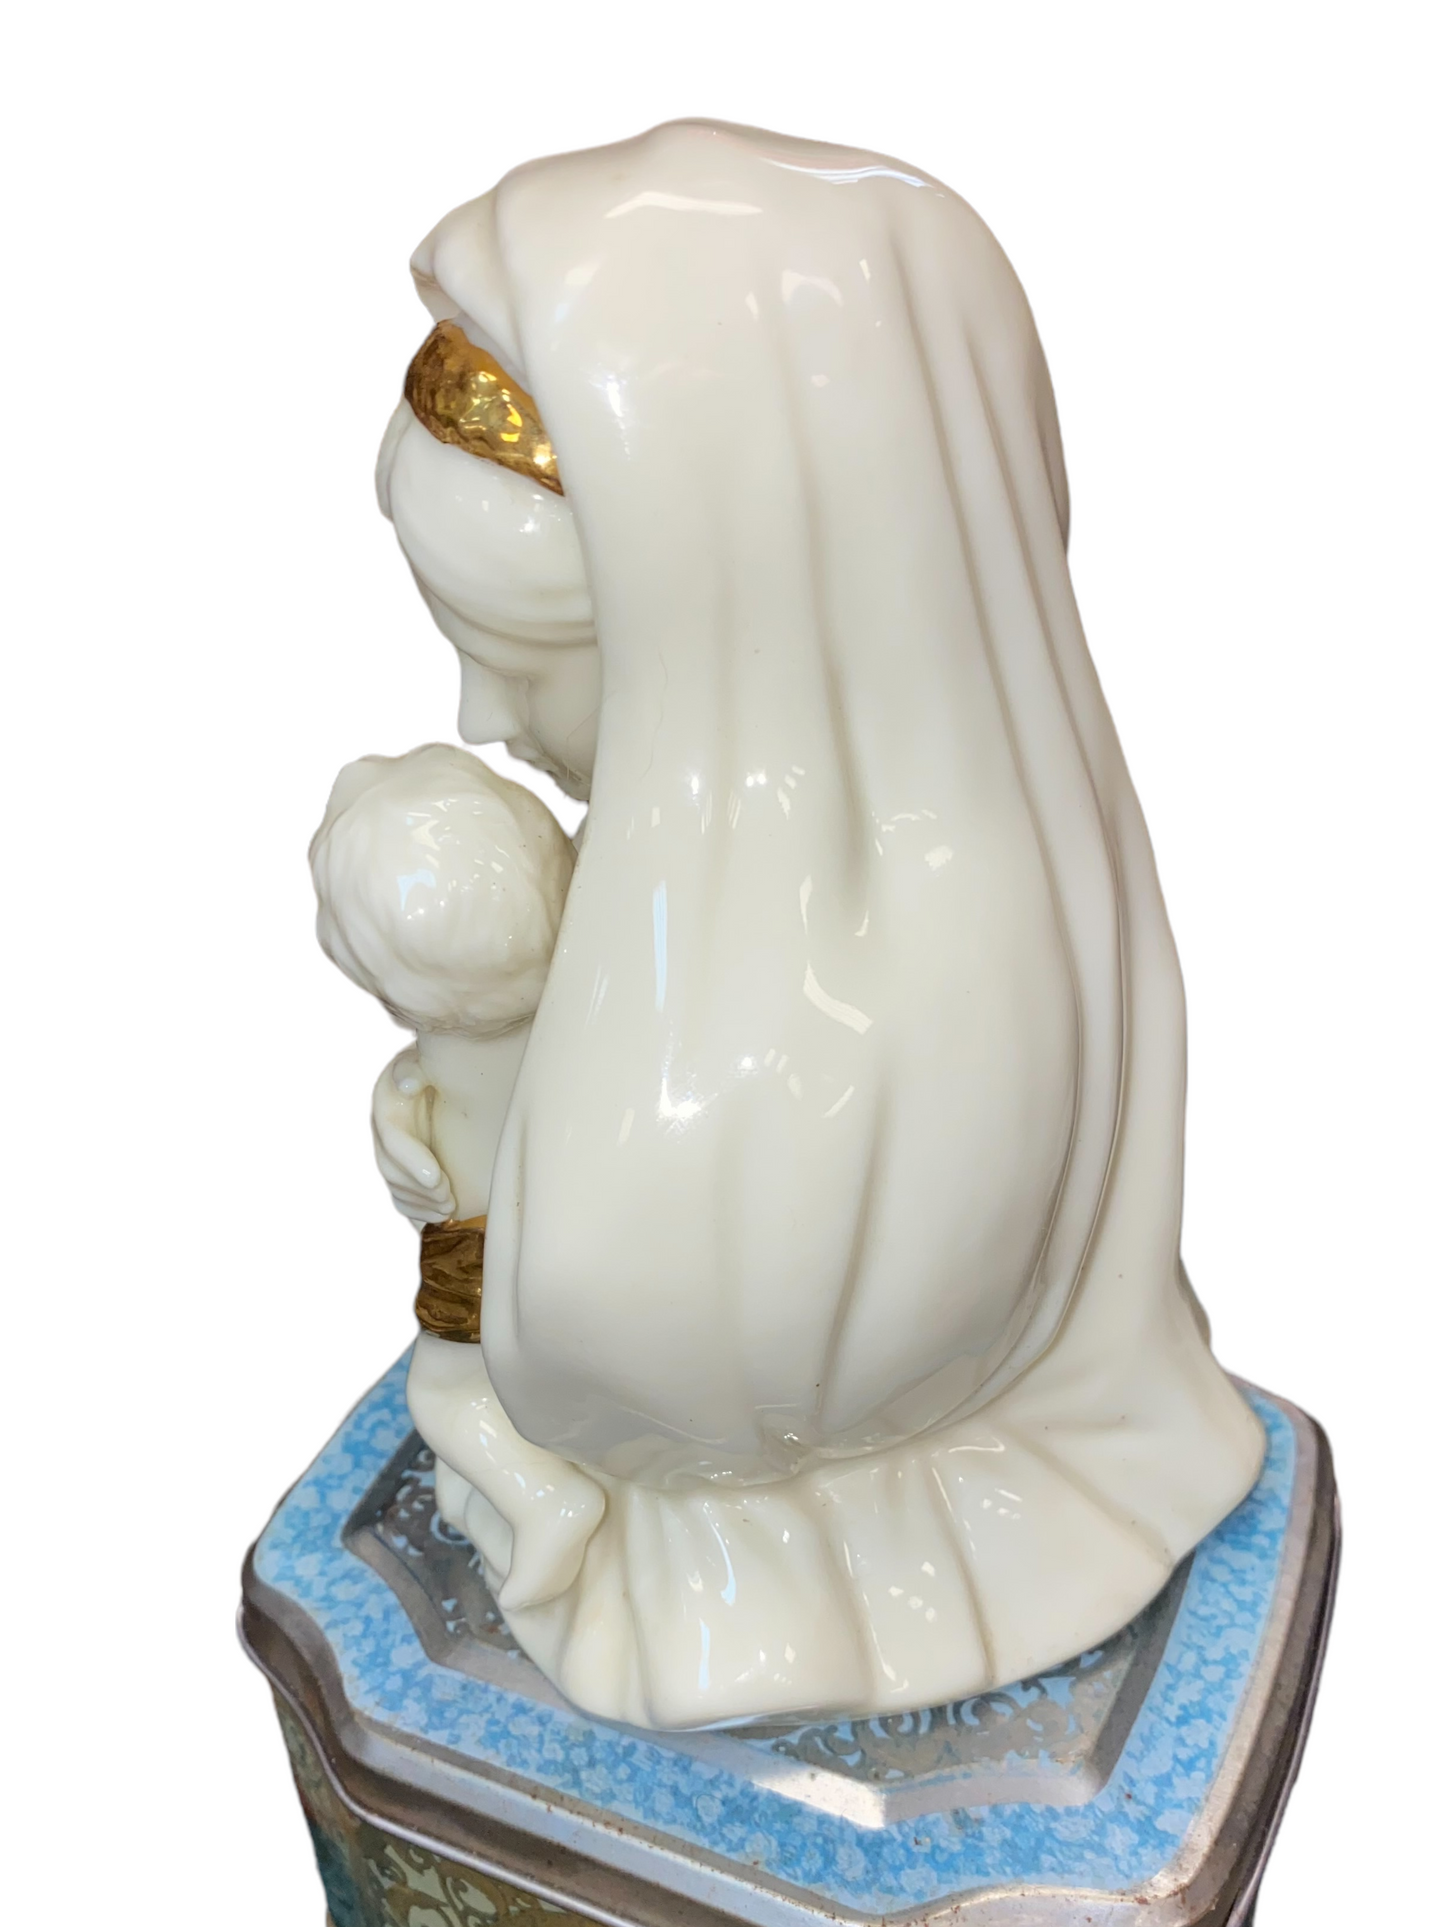 Vintage Lefton Porcelain Mary & Baby Jesus Musical Figurine w/ Gold Accents